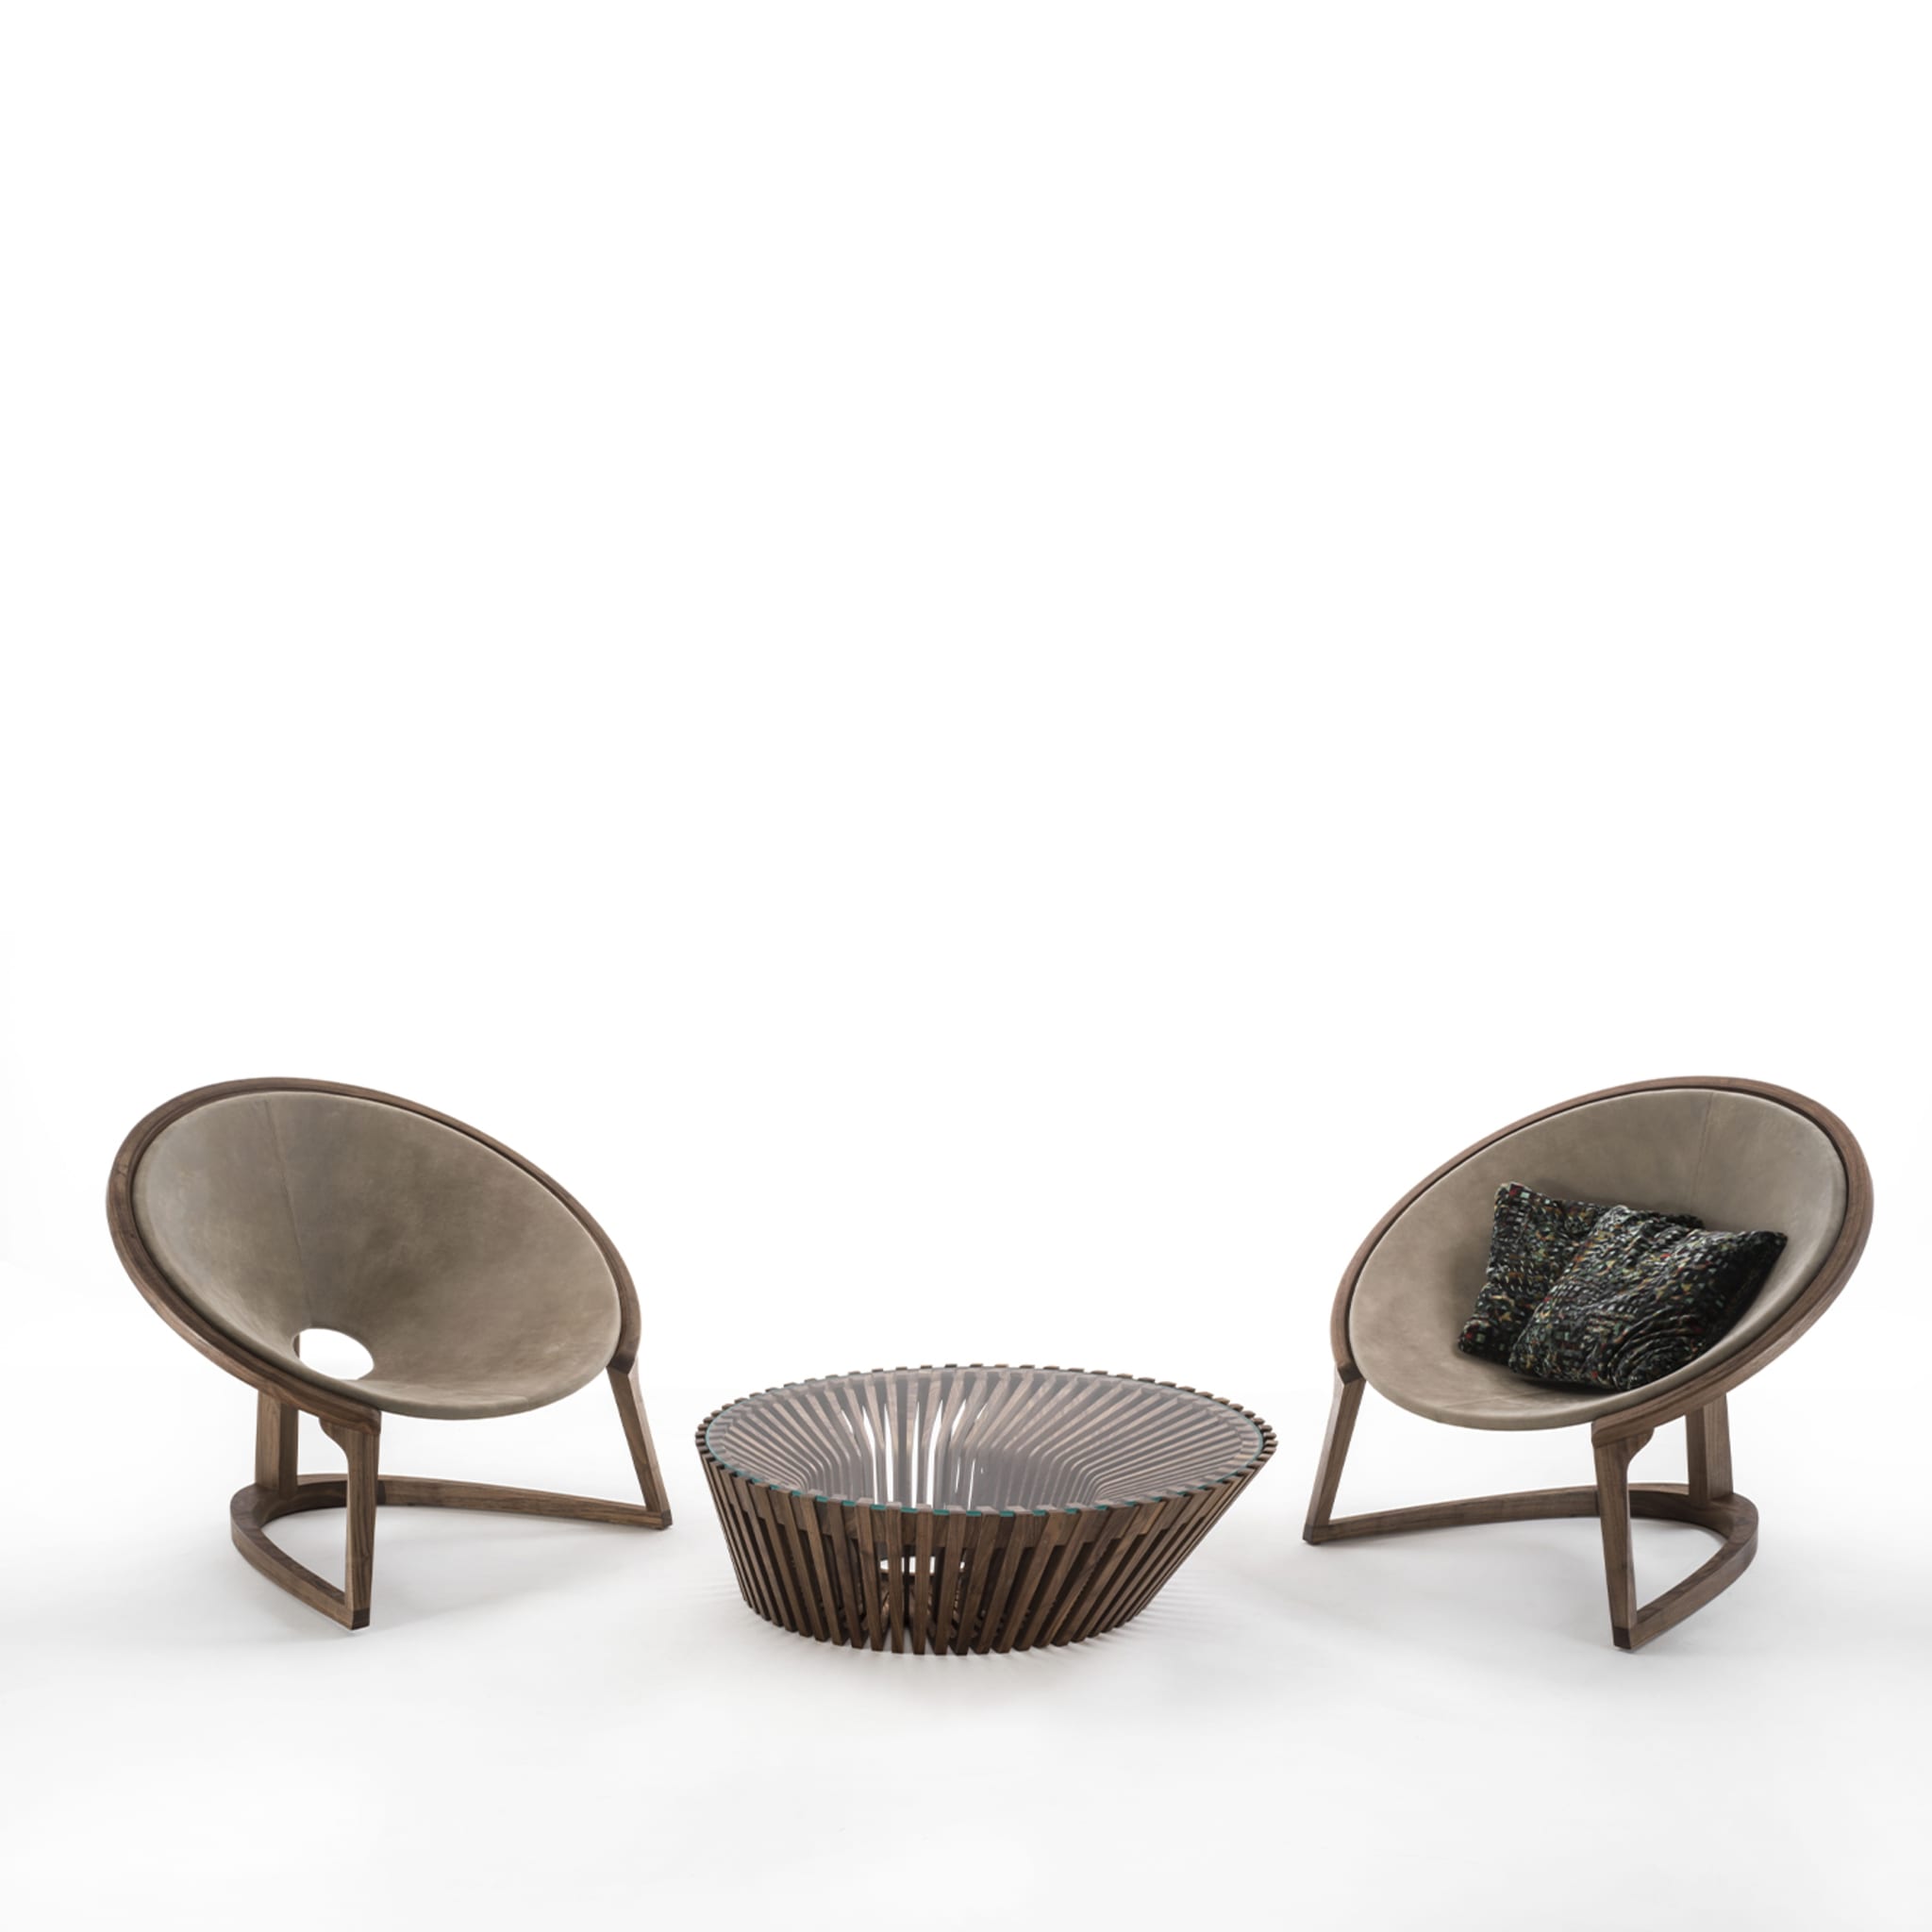 Ying & Yang Lounge Chair by Steve Leung - Alternative view 3